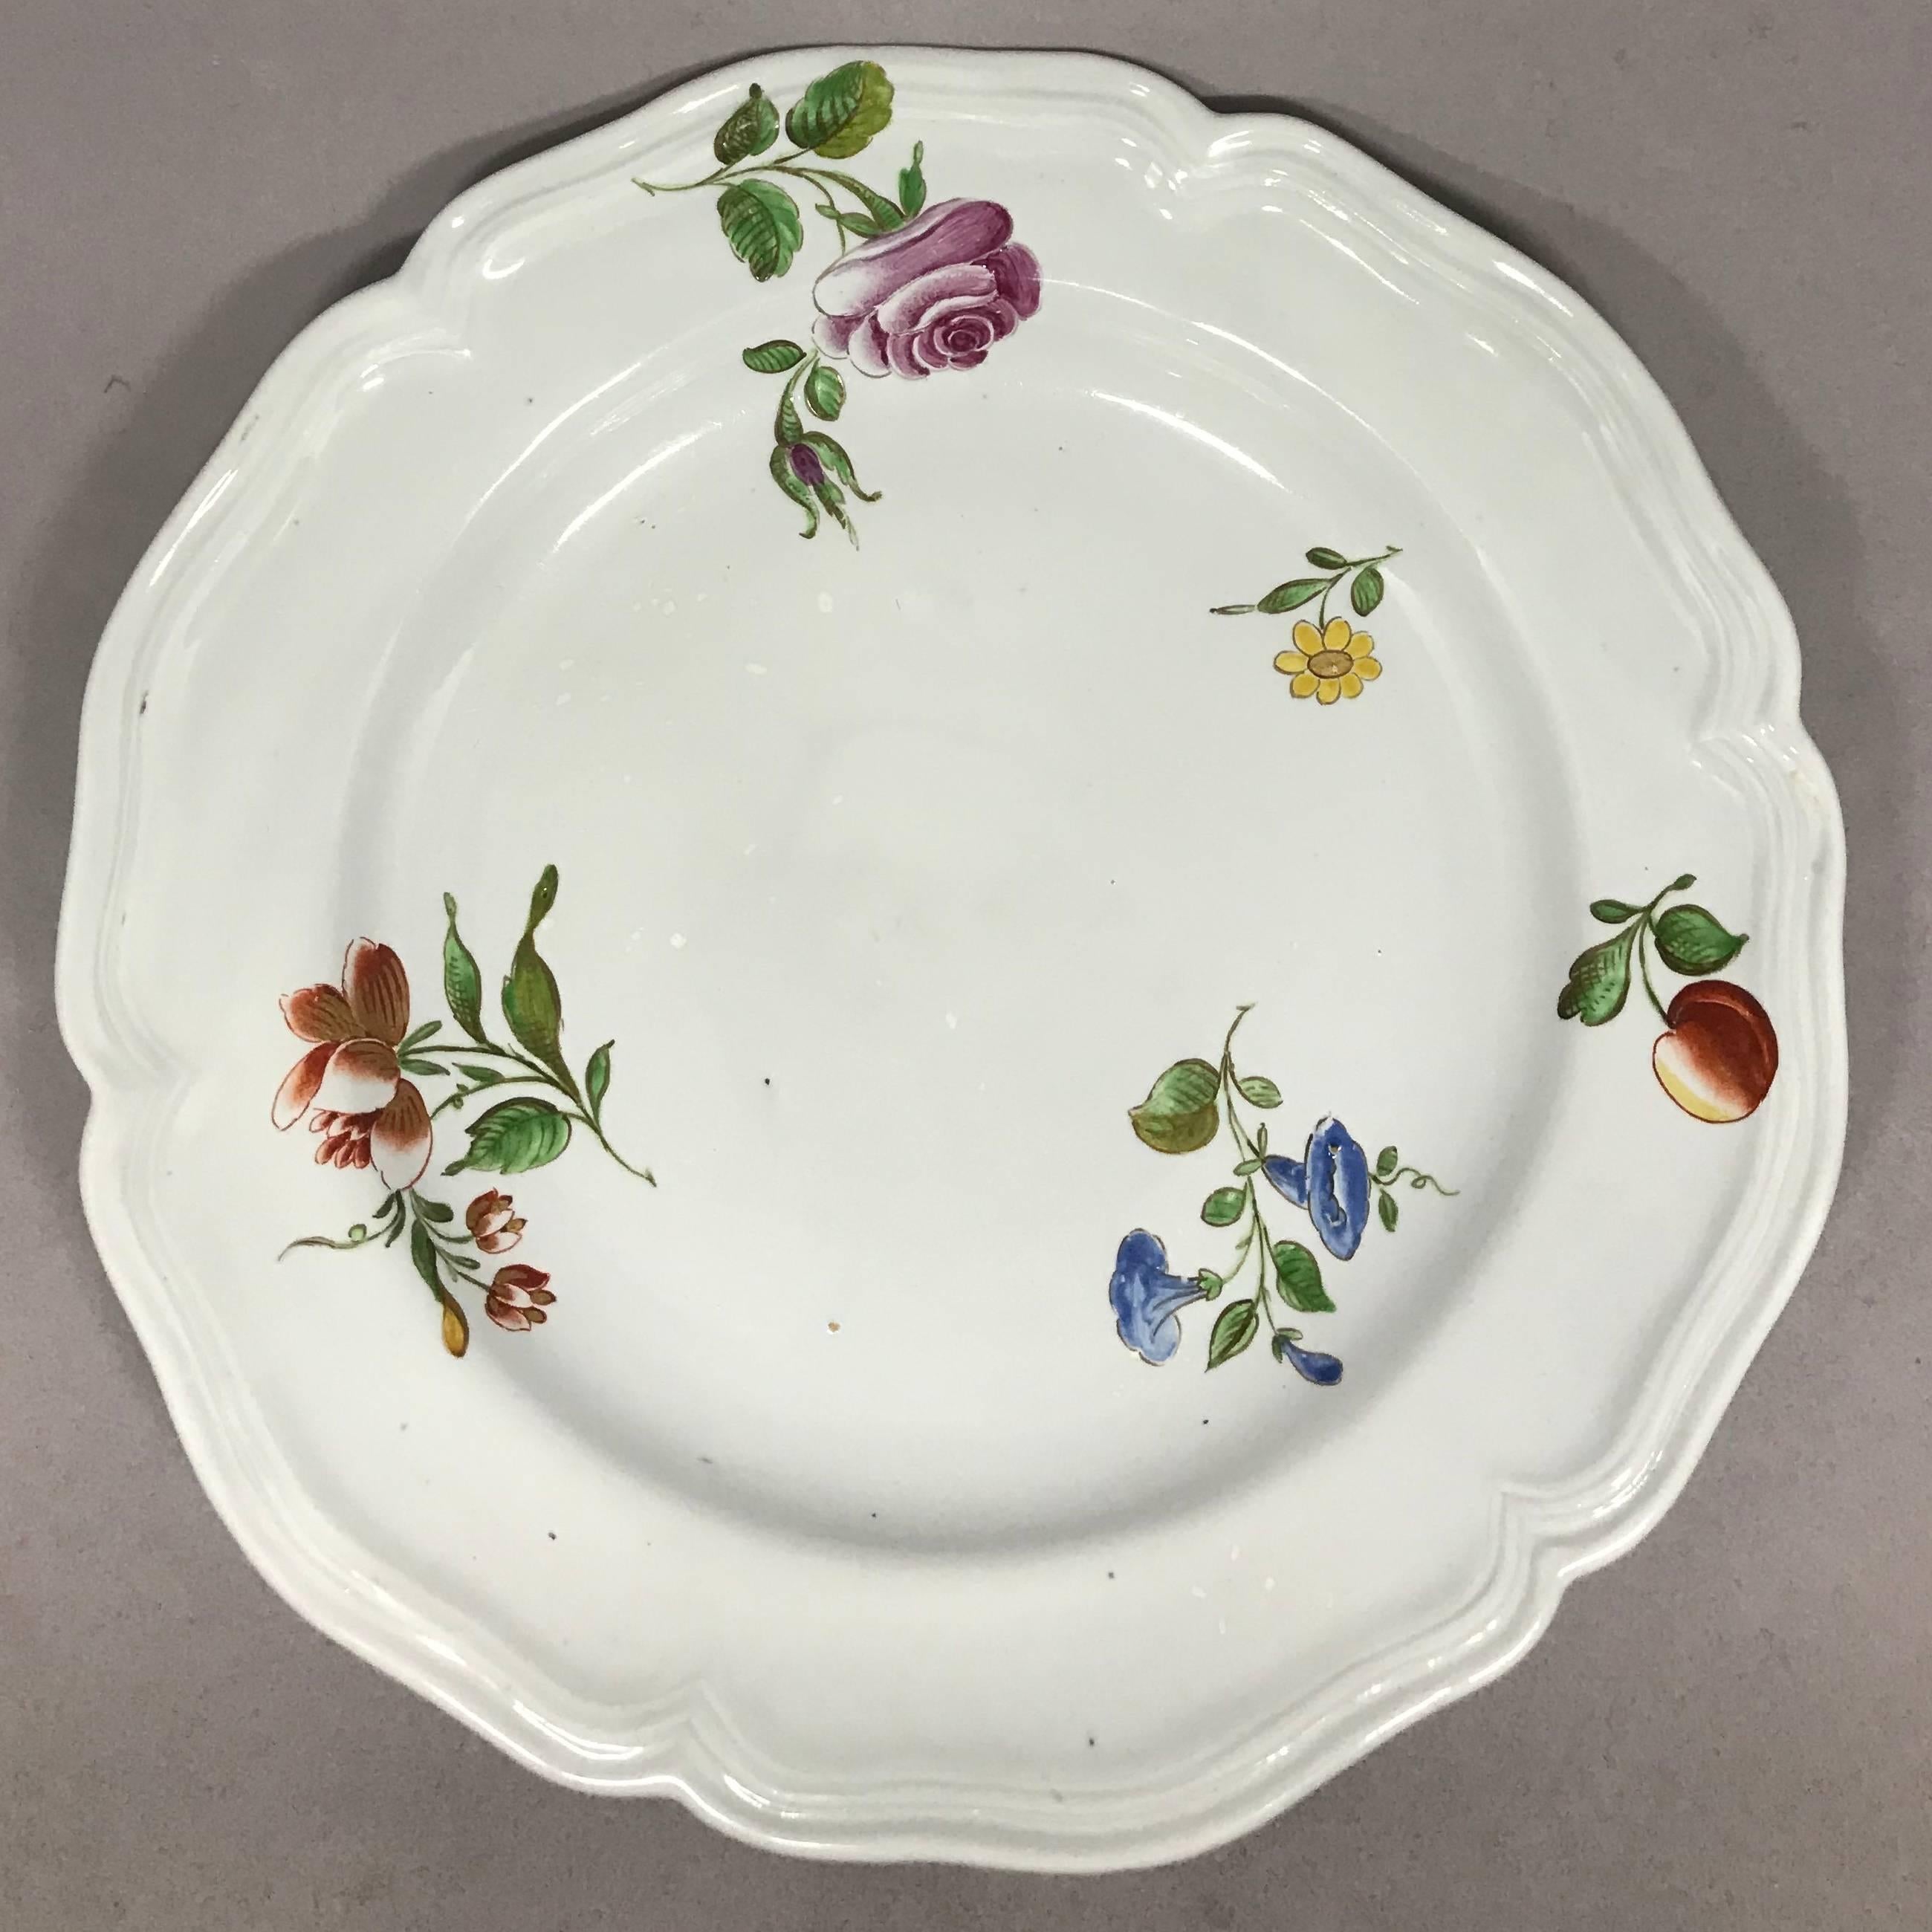 Doccia floral plate.  Antique Italian scallop-edge plate with hand-painted and gilt floral sprays, Italy, circa 1770.
Dimensions: 8.5